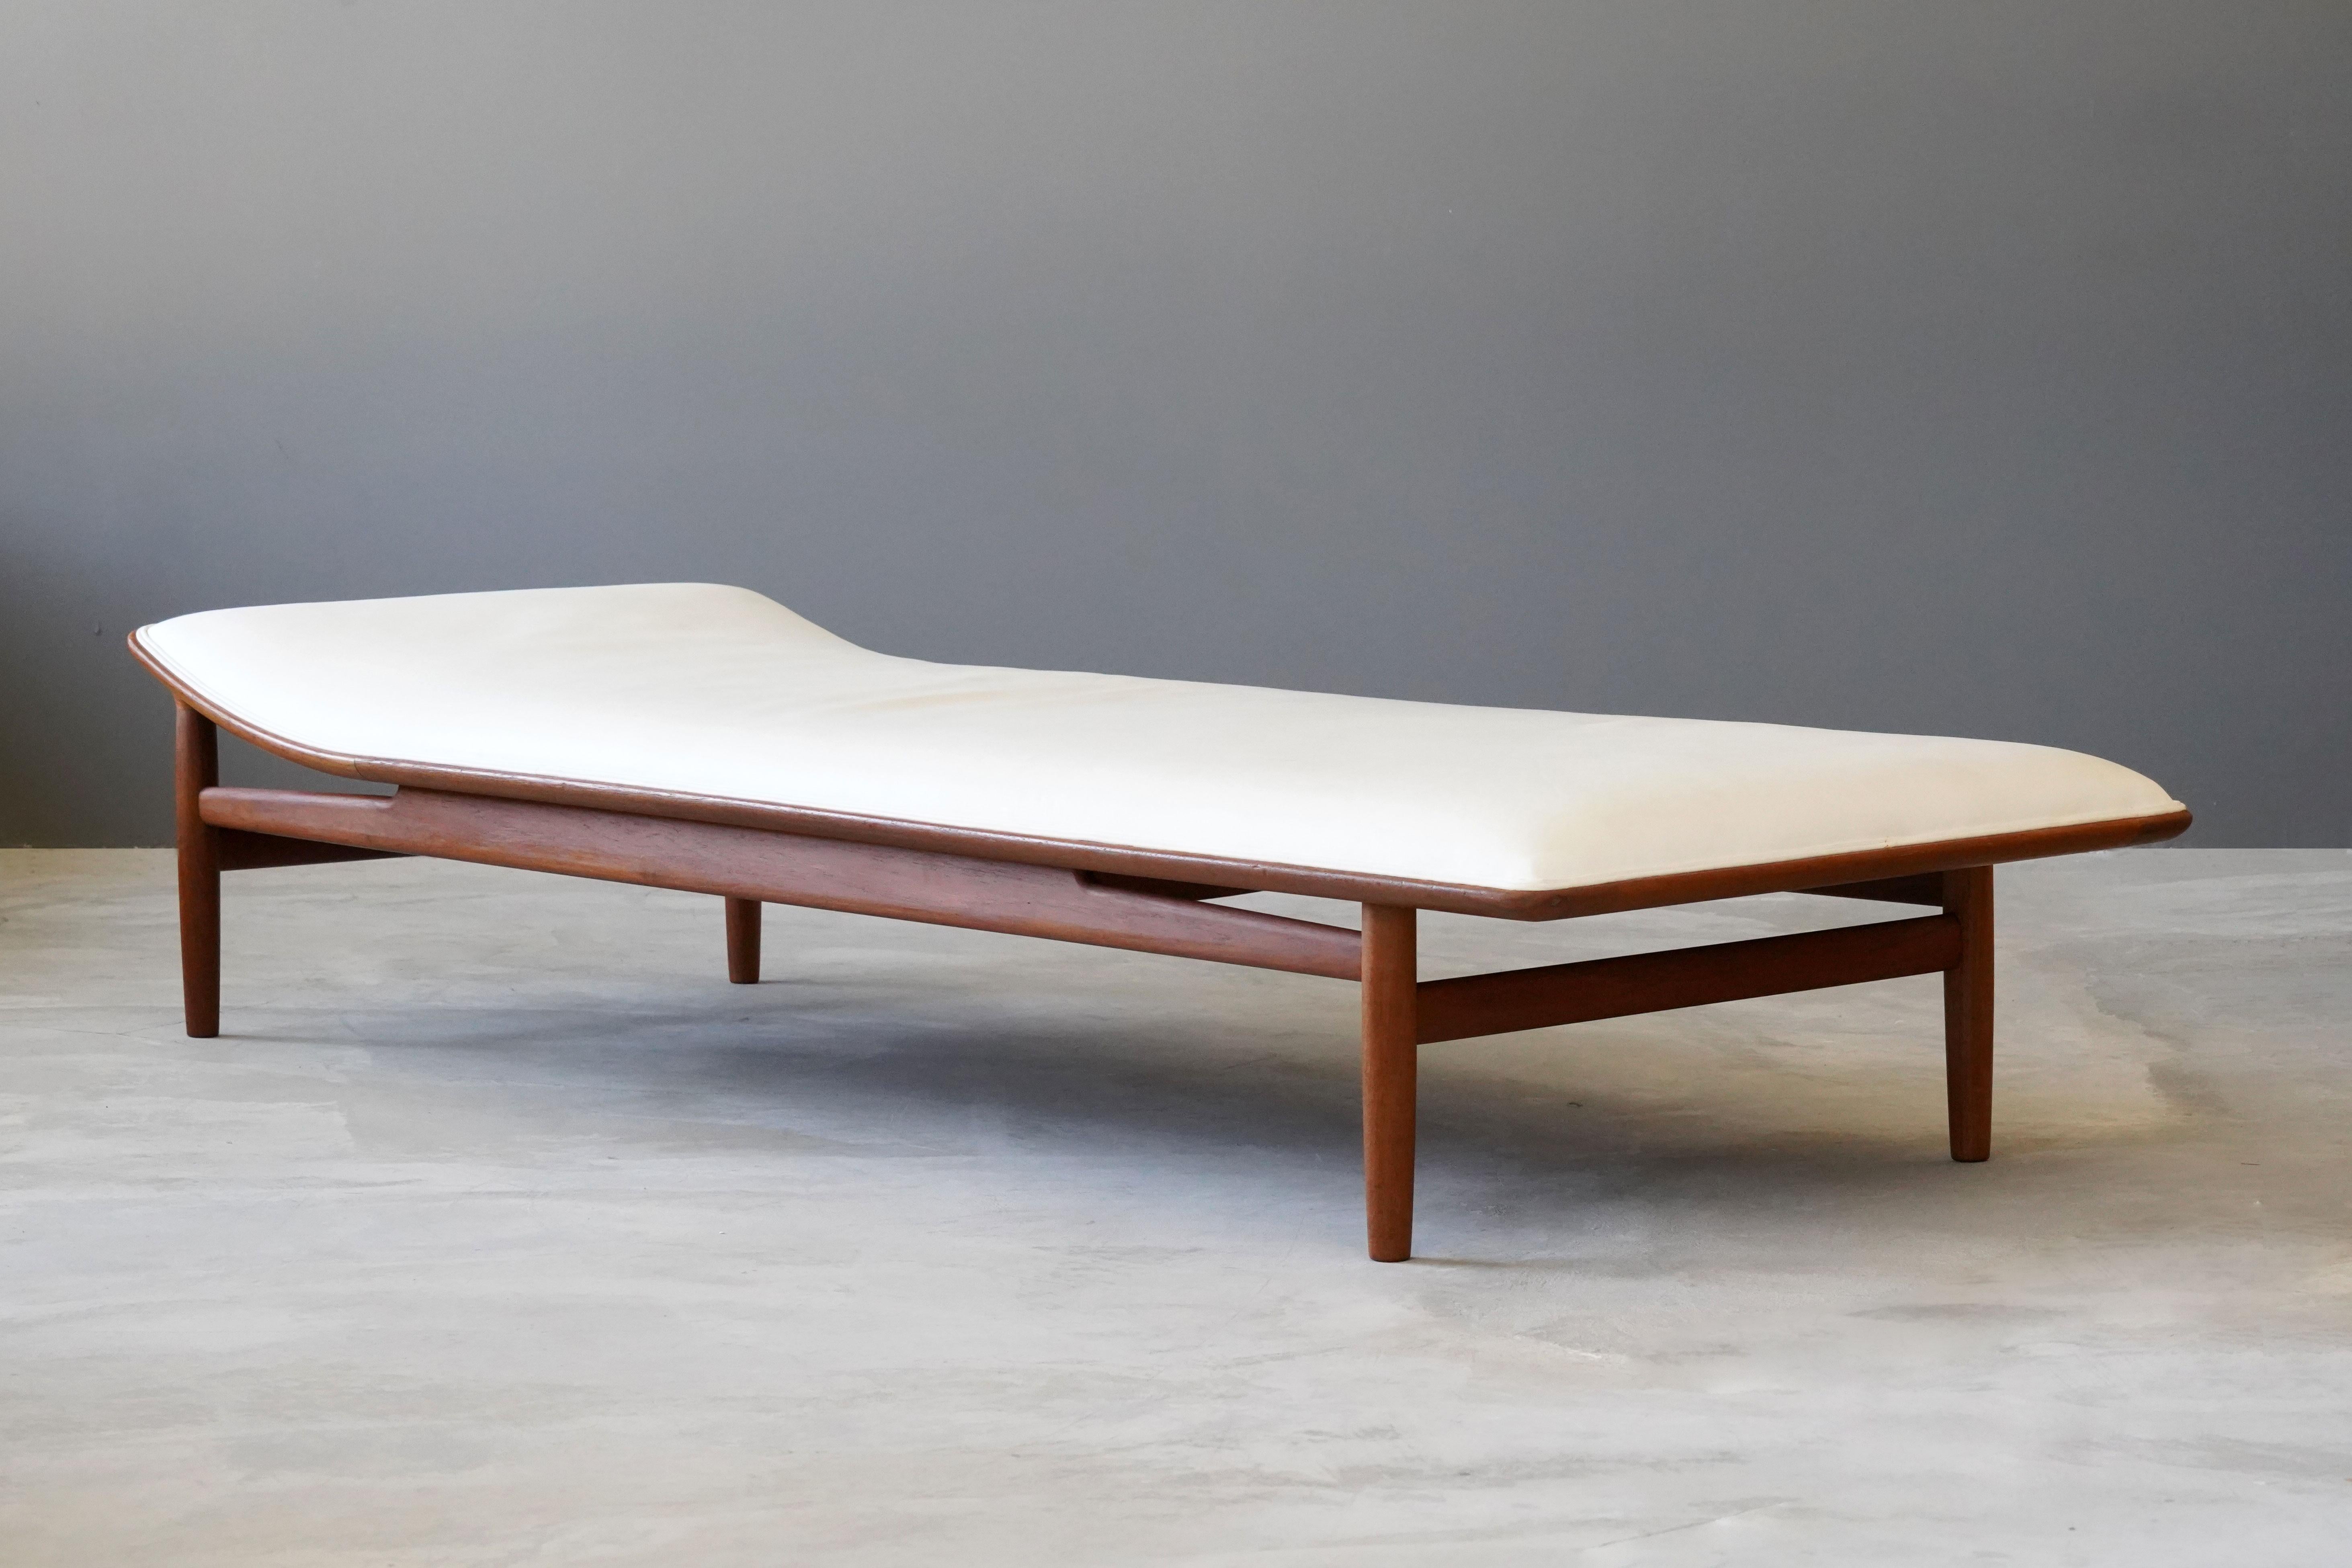 A rare modernist daybed, designed by Kurt Østervig and produced by Jason Møbler, 1950s. Branded. In finely carved teak, leatherette is most likely secondary. 

Contemporary Danish designers include Finn Juhl, Hans Wegner, Arne Jacobsen, and Poul